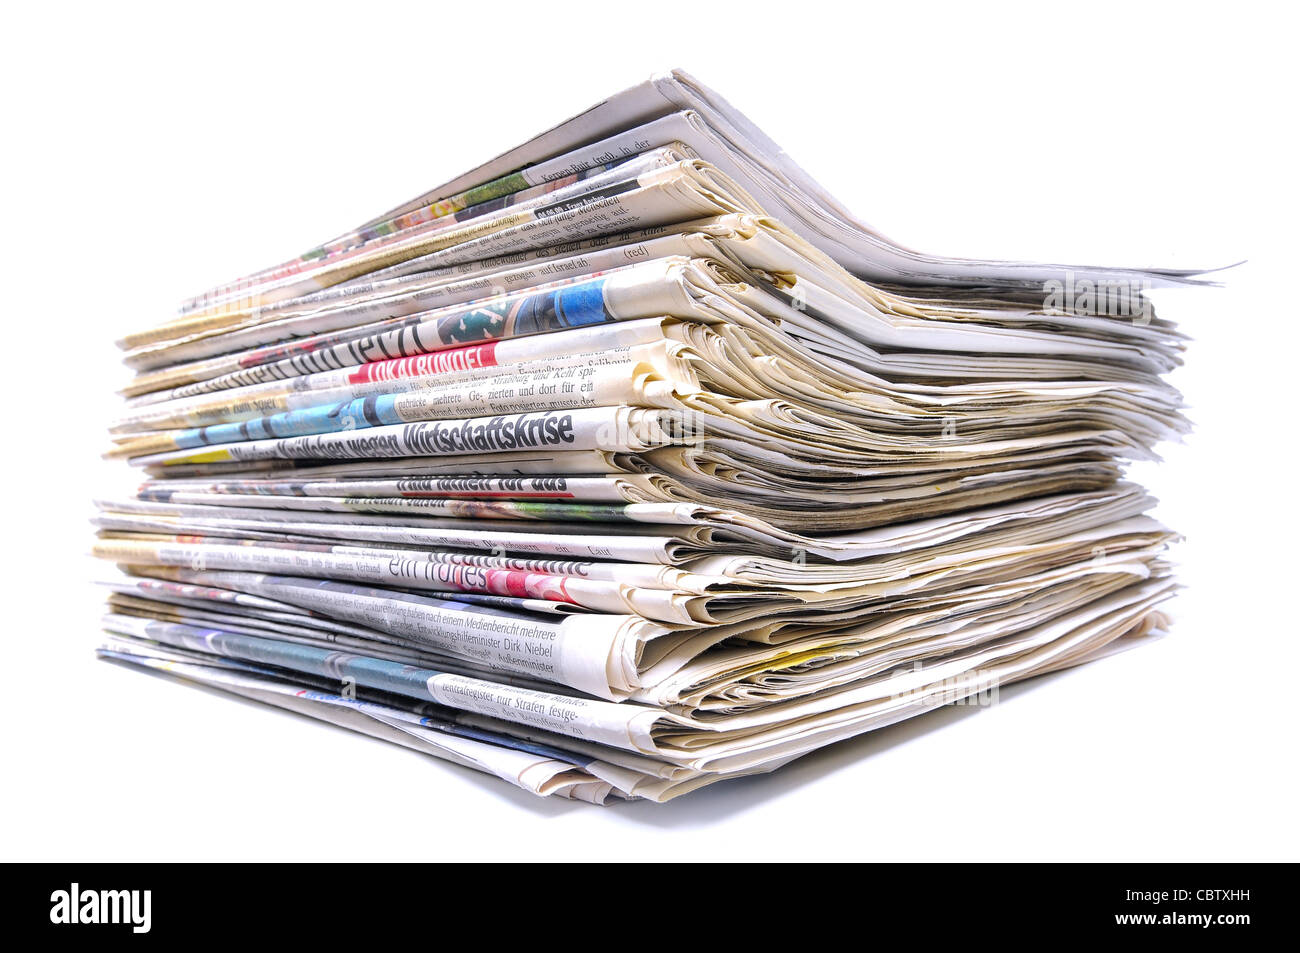 Pile of various newspapers over white background Stock Photo